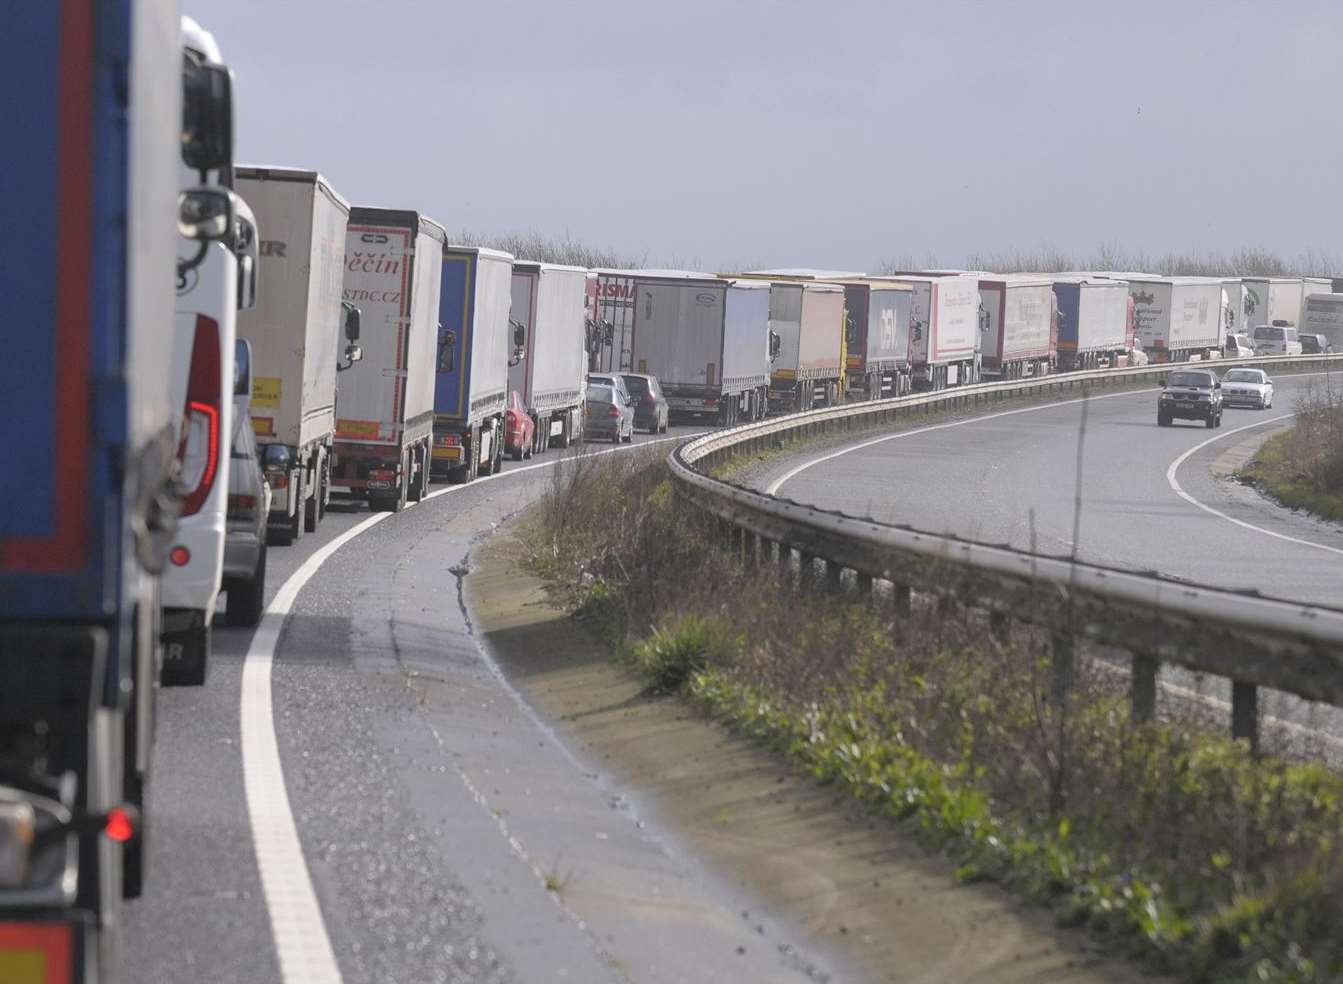 Traffic has been known to stack up along the A20, causing chaos in Dover